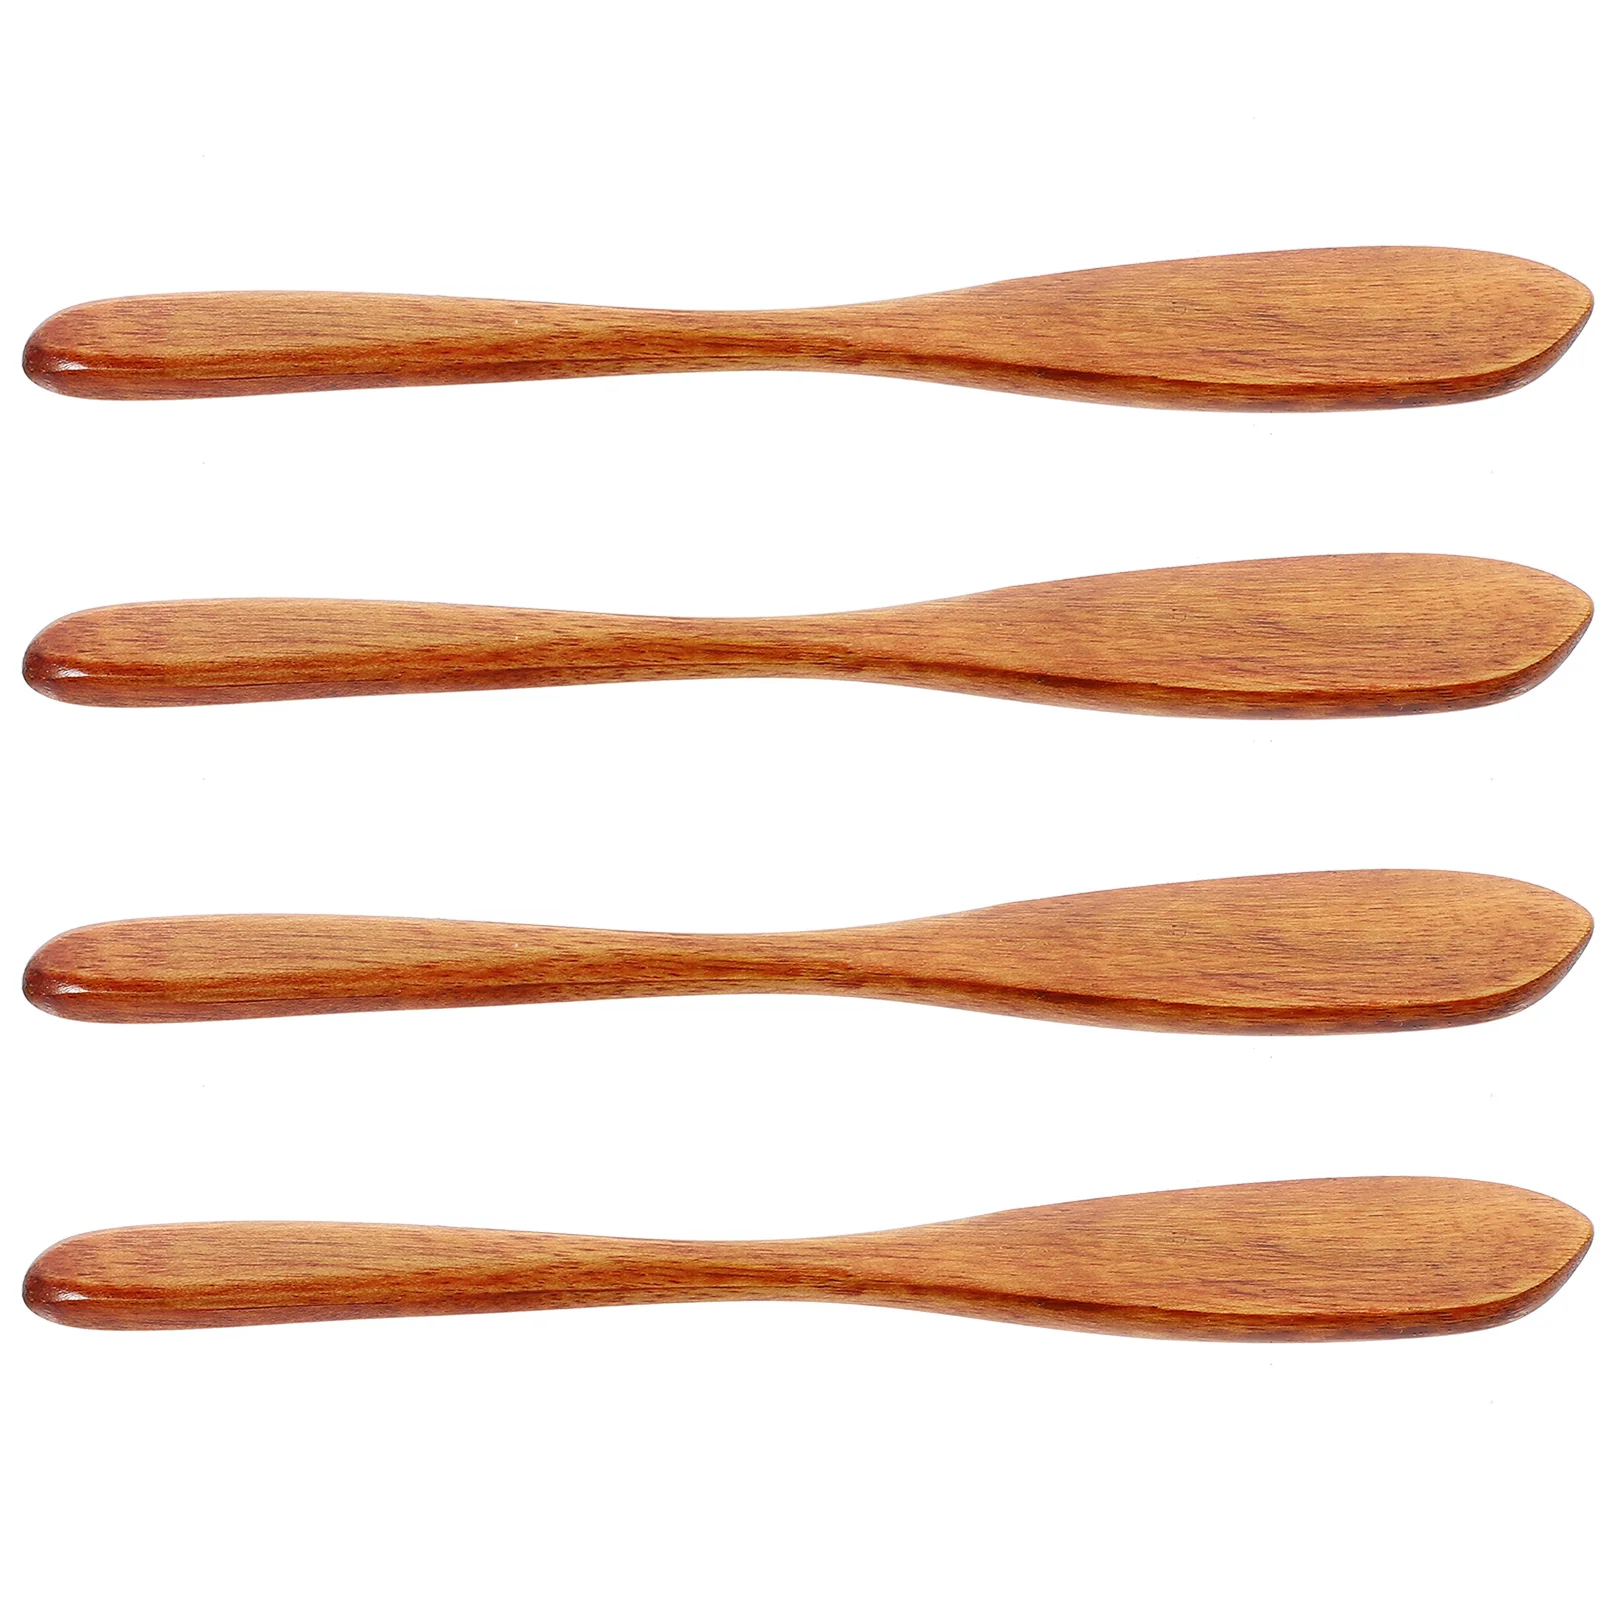 

Wooden Butter Cheese Spreaders: 4pcs Jam Spreader Jelly Bread Spatula Condiment and Sandwich Kitchen Utensils